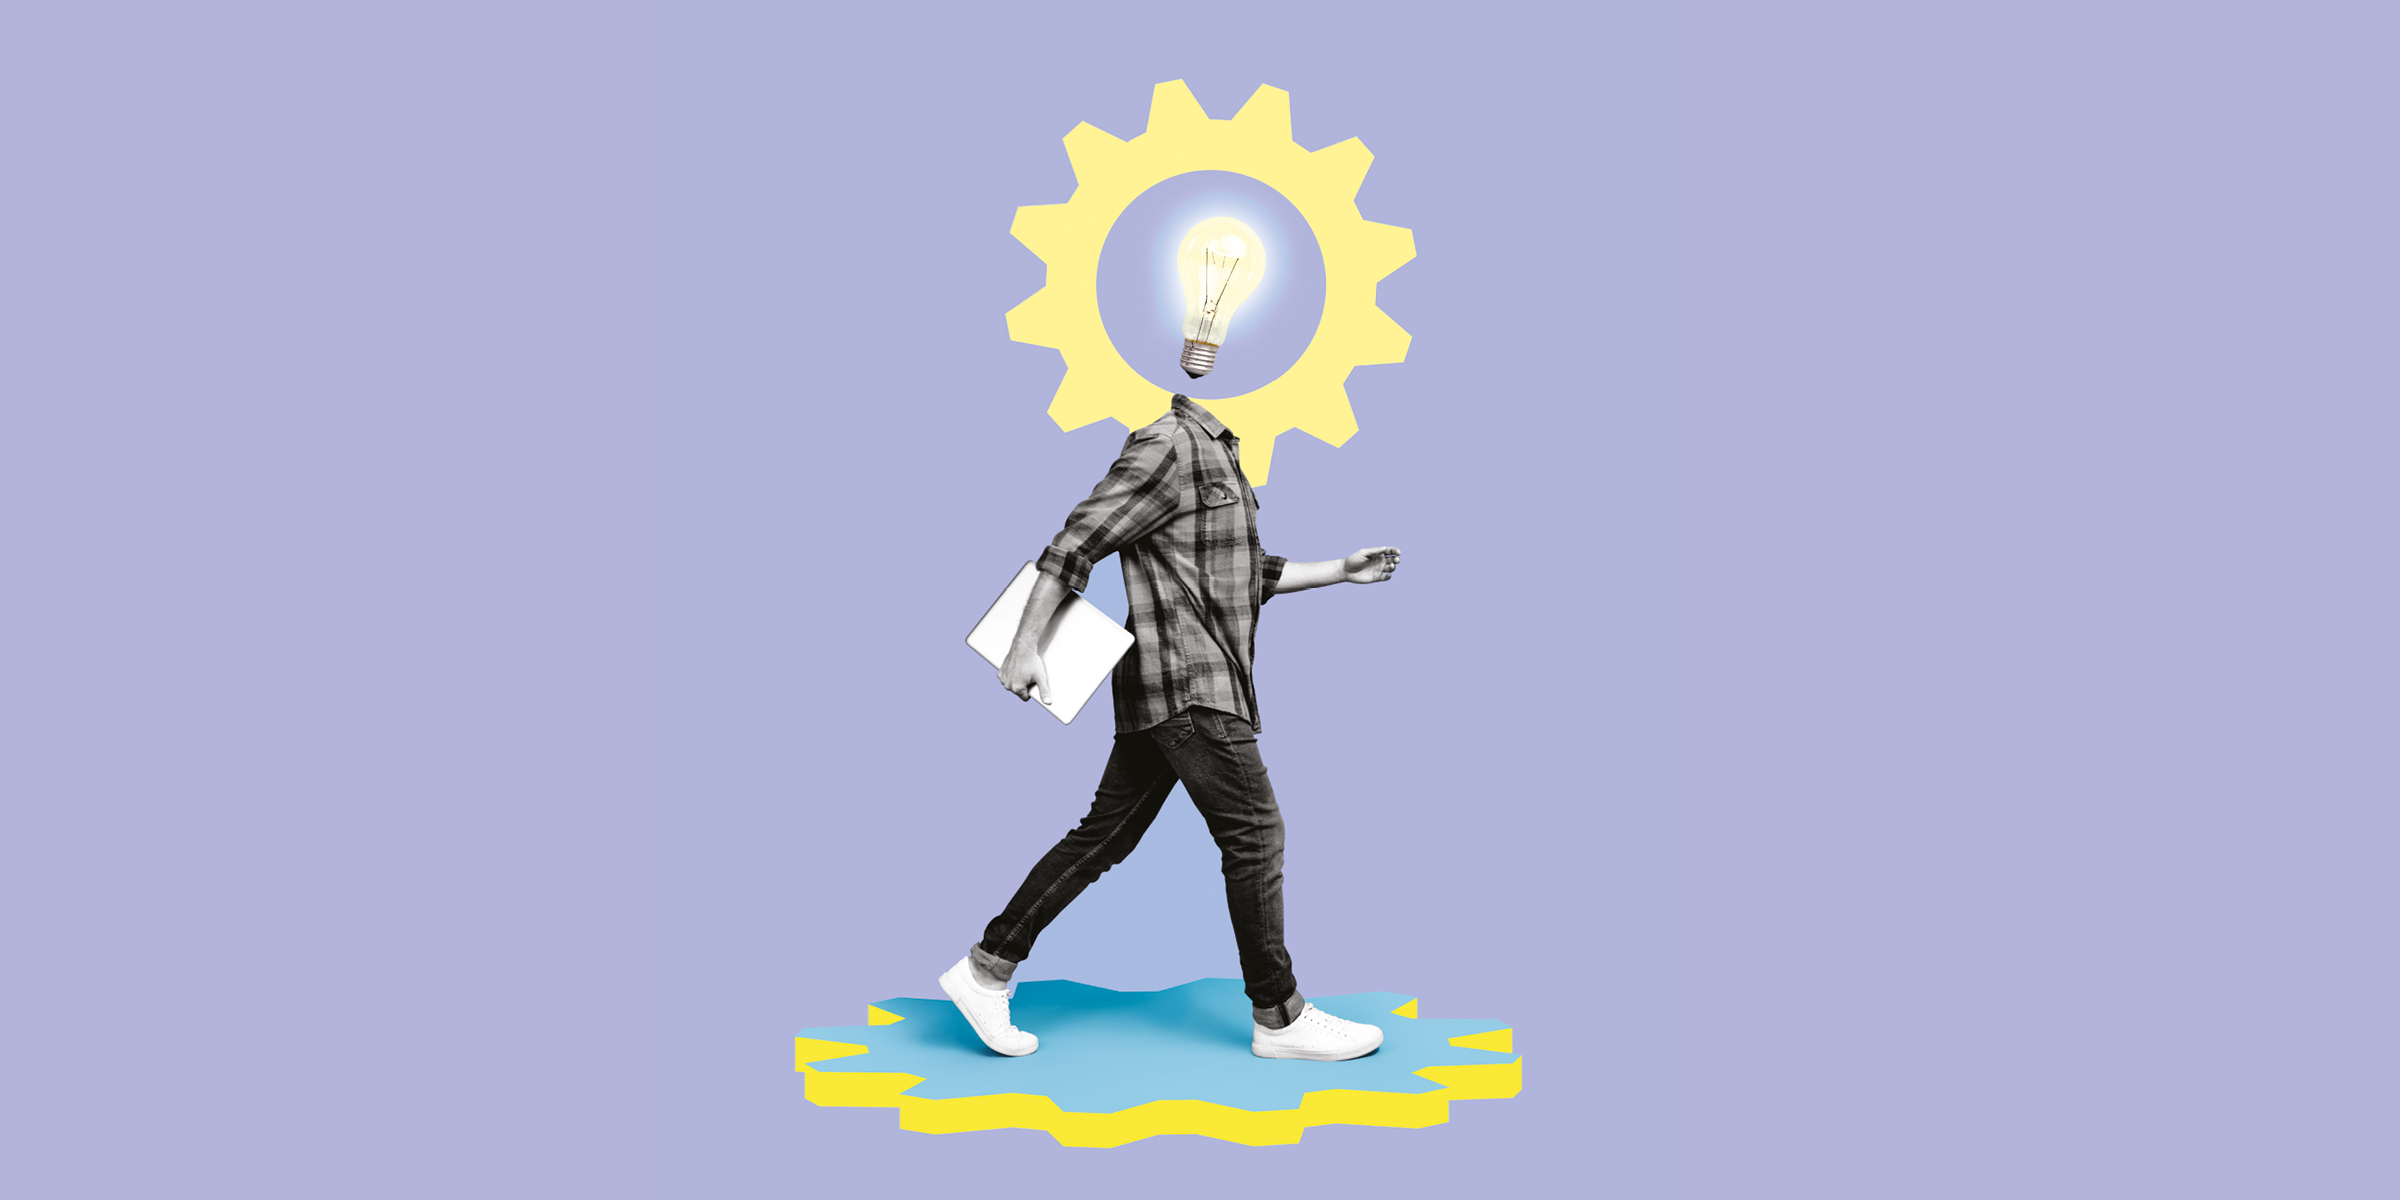 a graphic of a walking person with a light bulb on his head | The great employee glow up